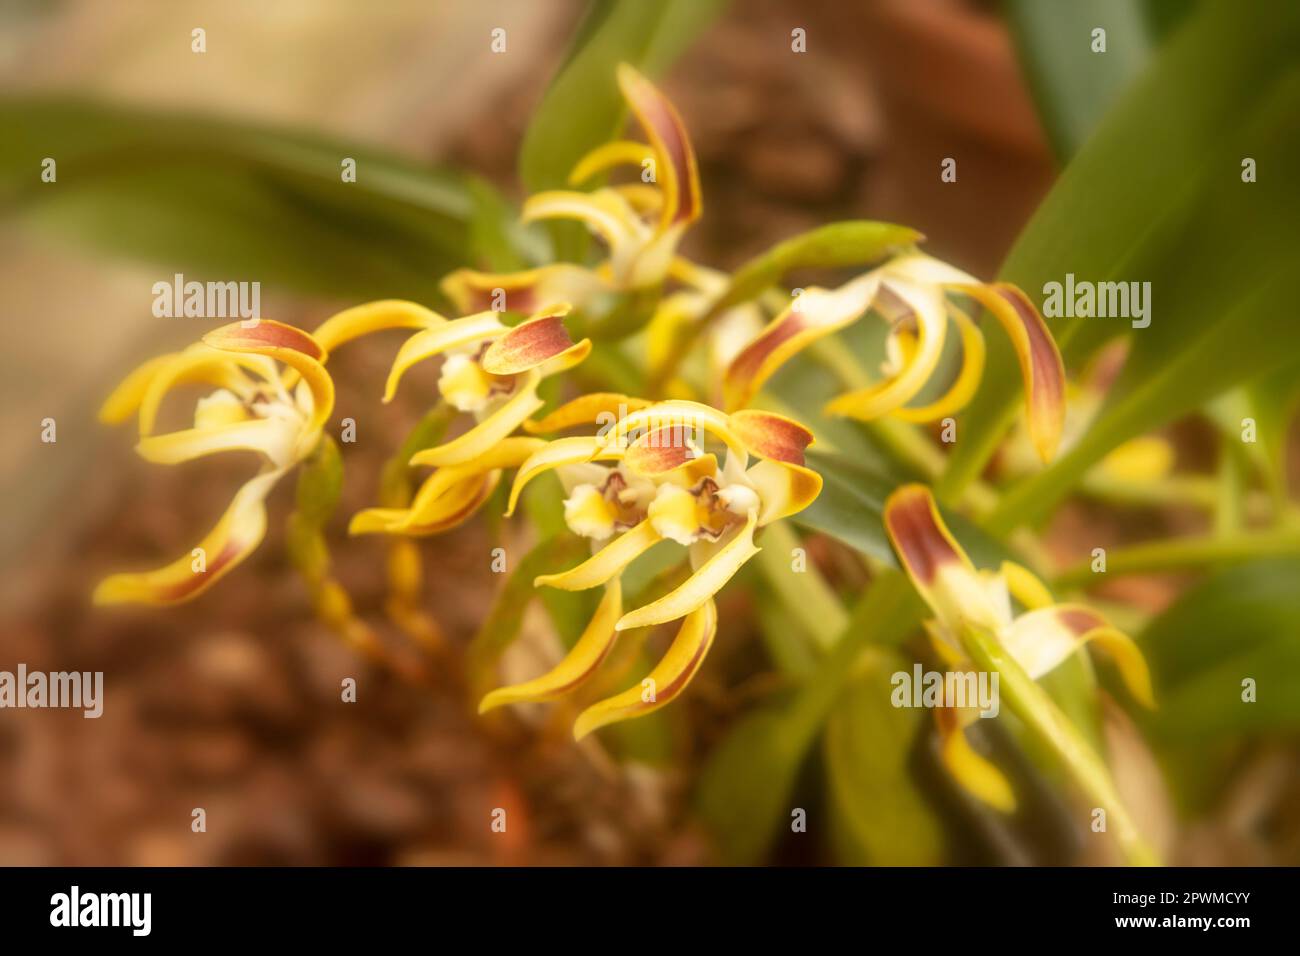 Interesting Maxillaria Luteoalba (Orchid) in flower,. Natural close up flowering plant portrait Stock Photo